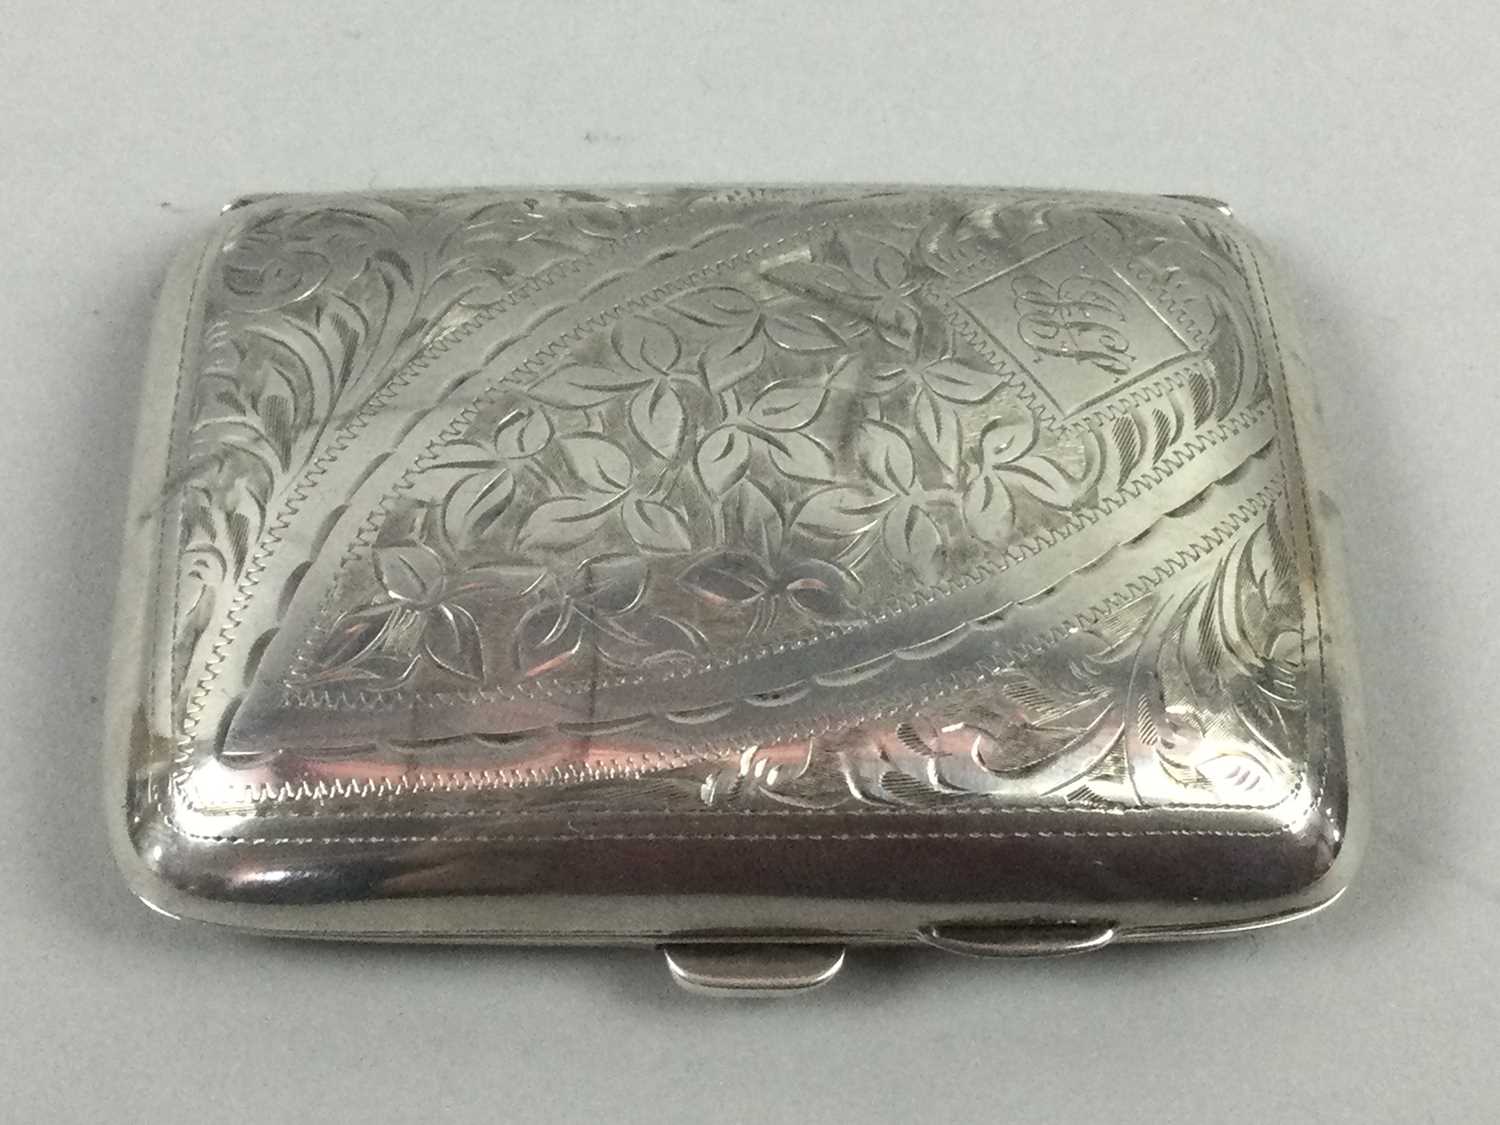 Lot 2 - A SILVER CIGARETTE CASE AND OTHER SILVER ITEMS